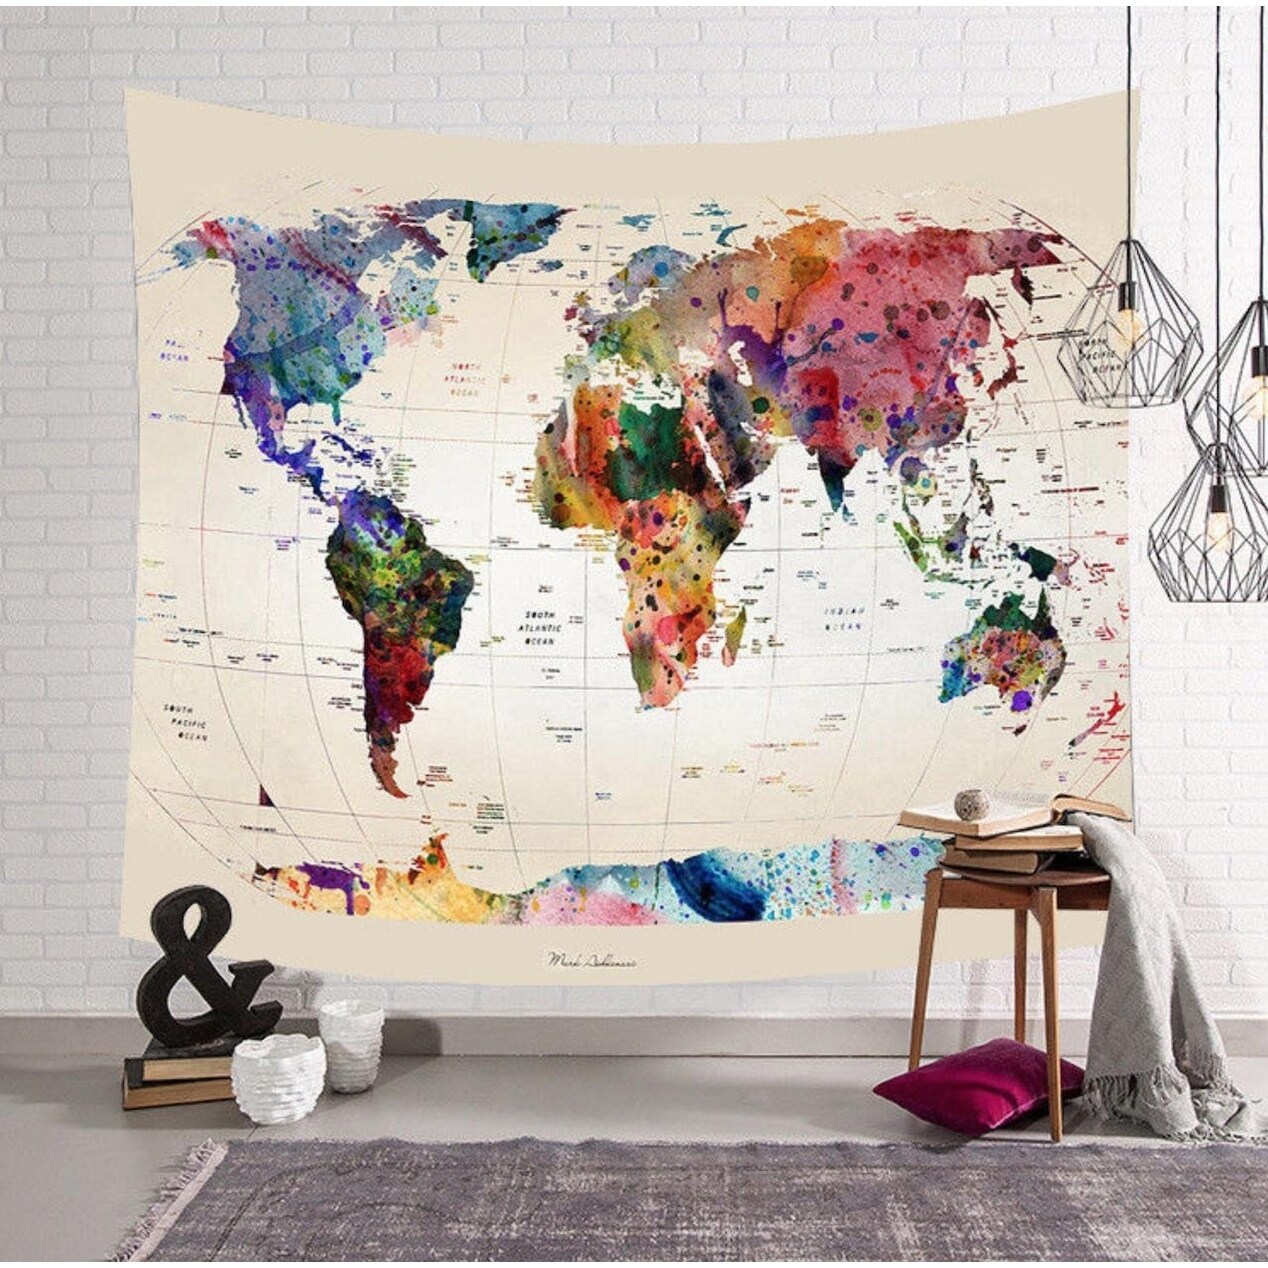 Shop Retro Colorful World Map Tapestry Wall Hanging 59 X 51 10 Overstock 28588377